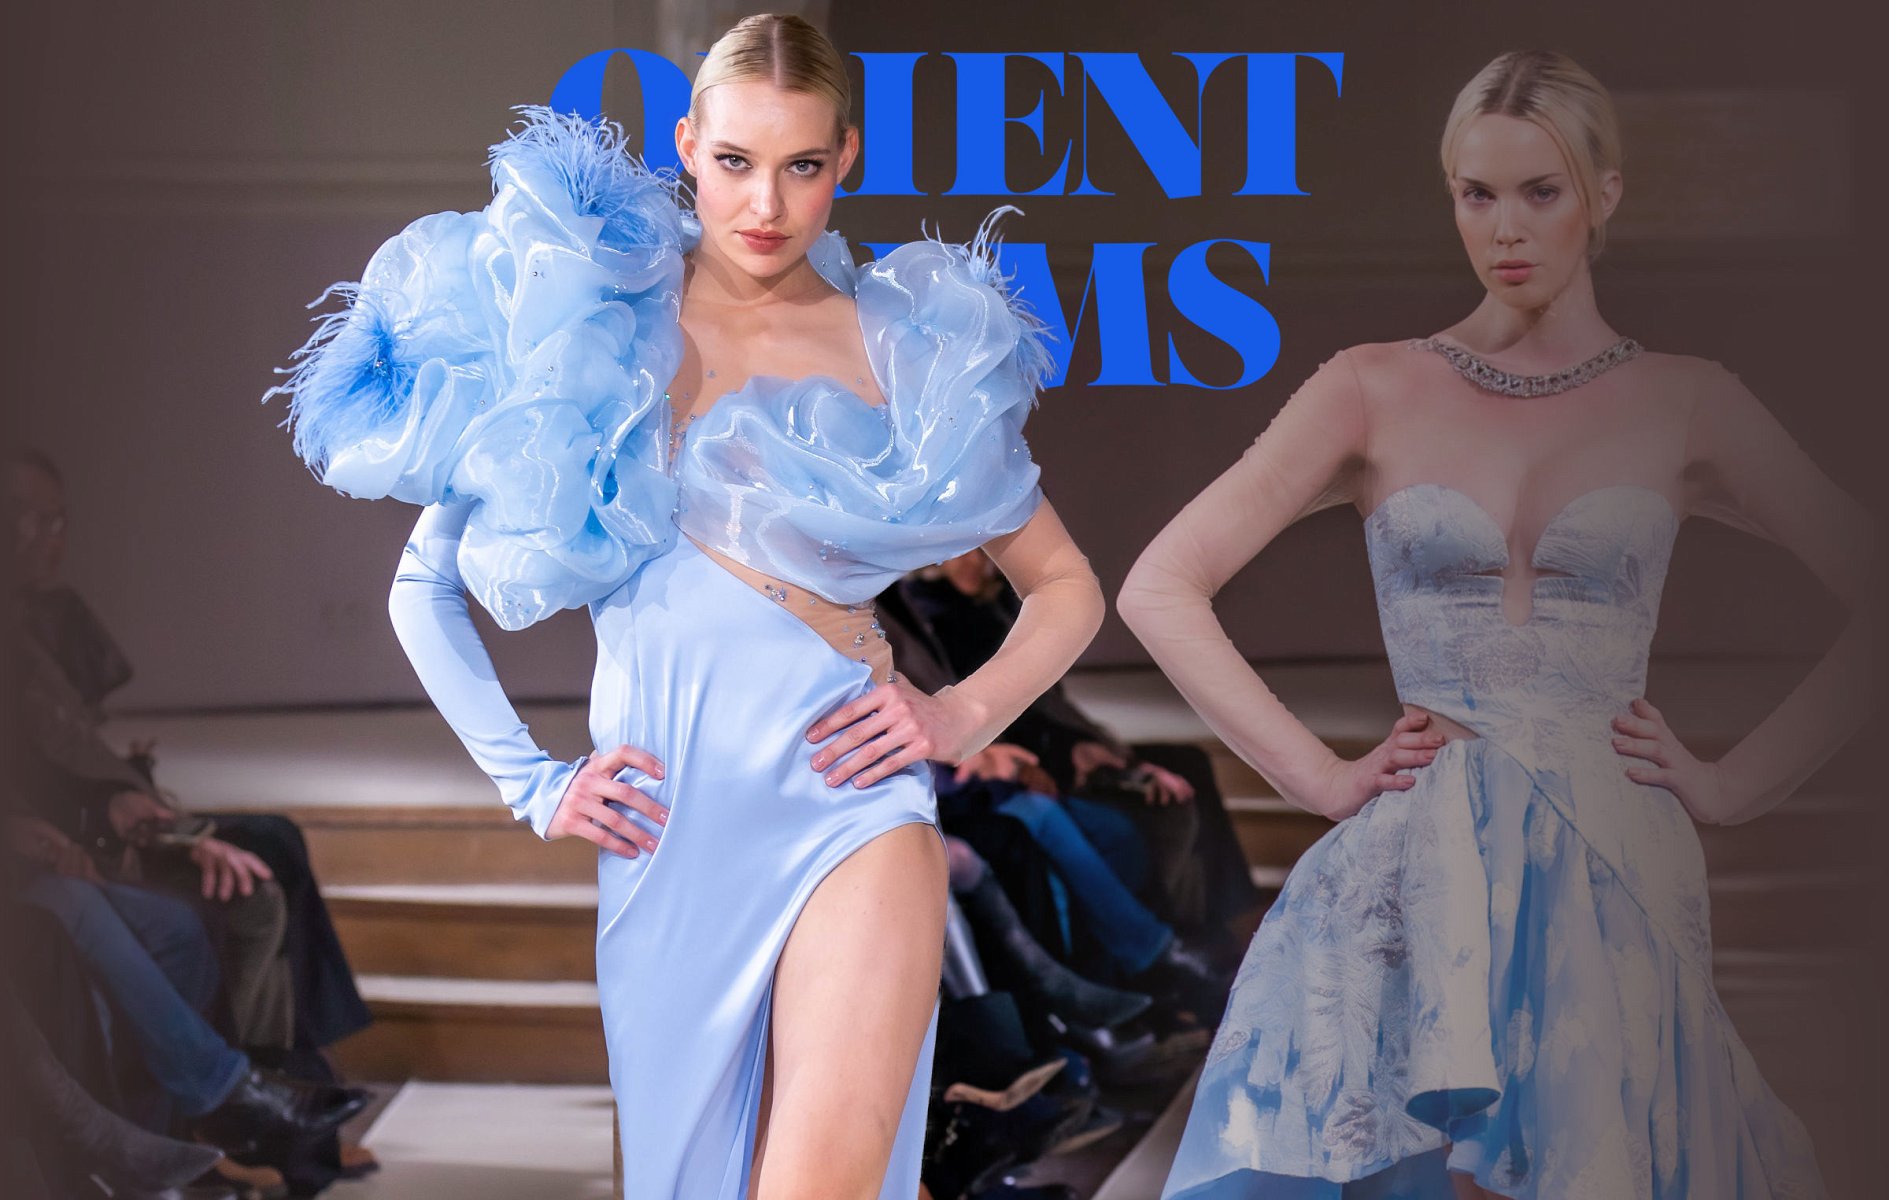 The Fashion Muses on Instagram: Louis Feraud Haute Couture Spring